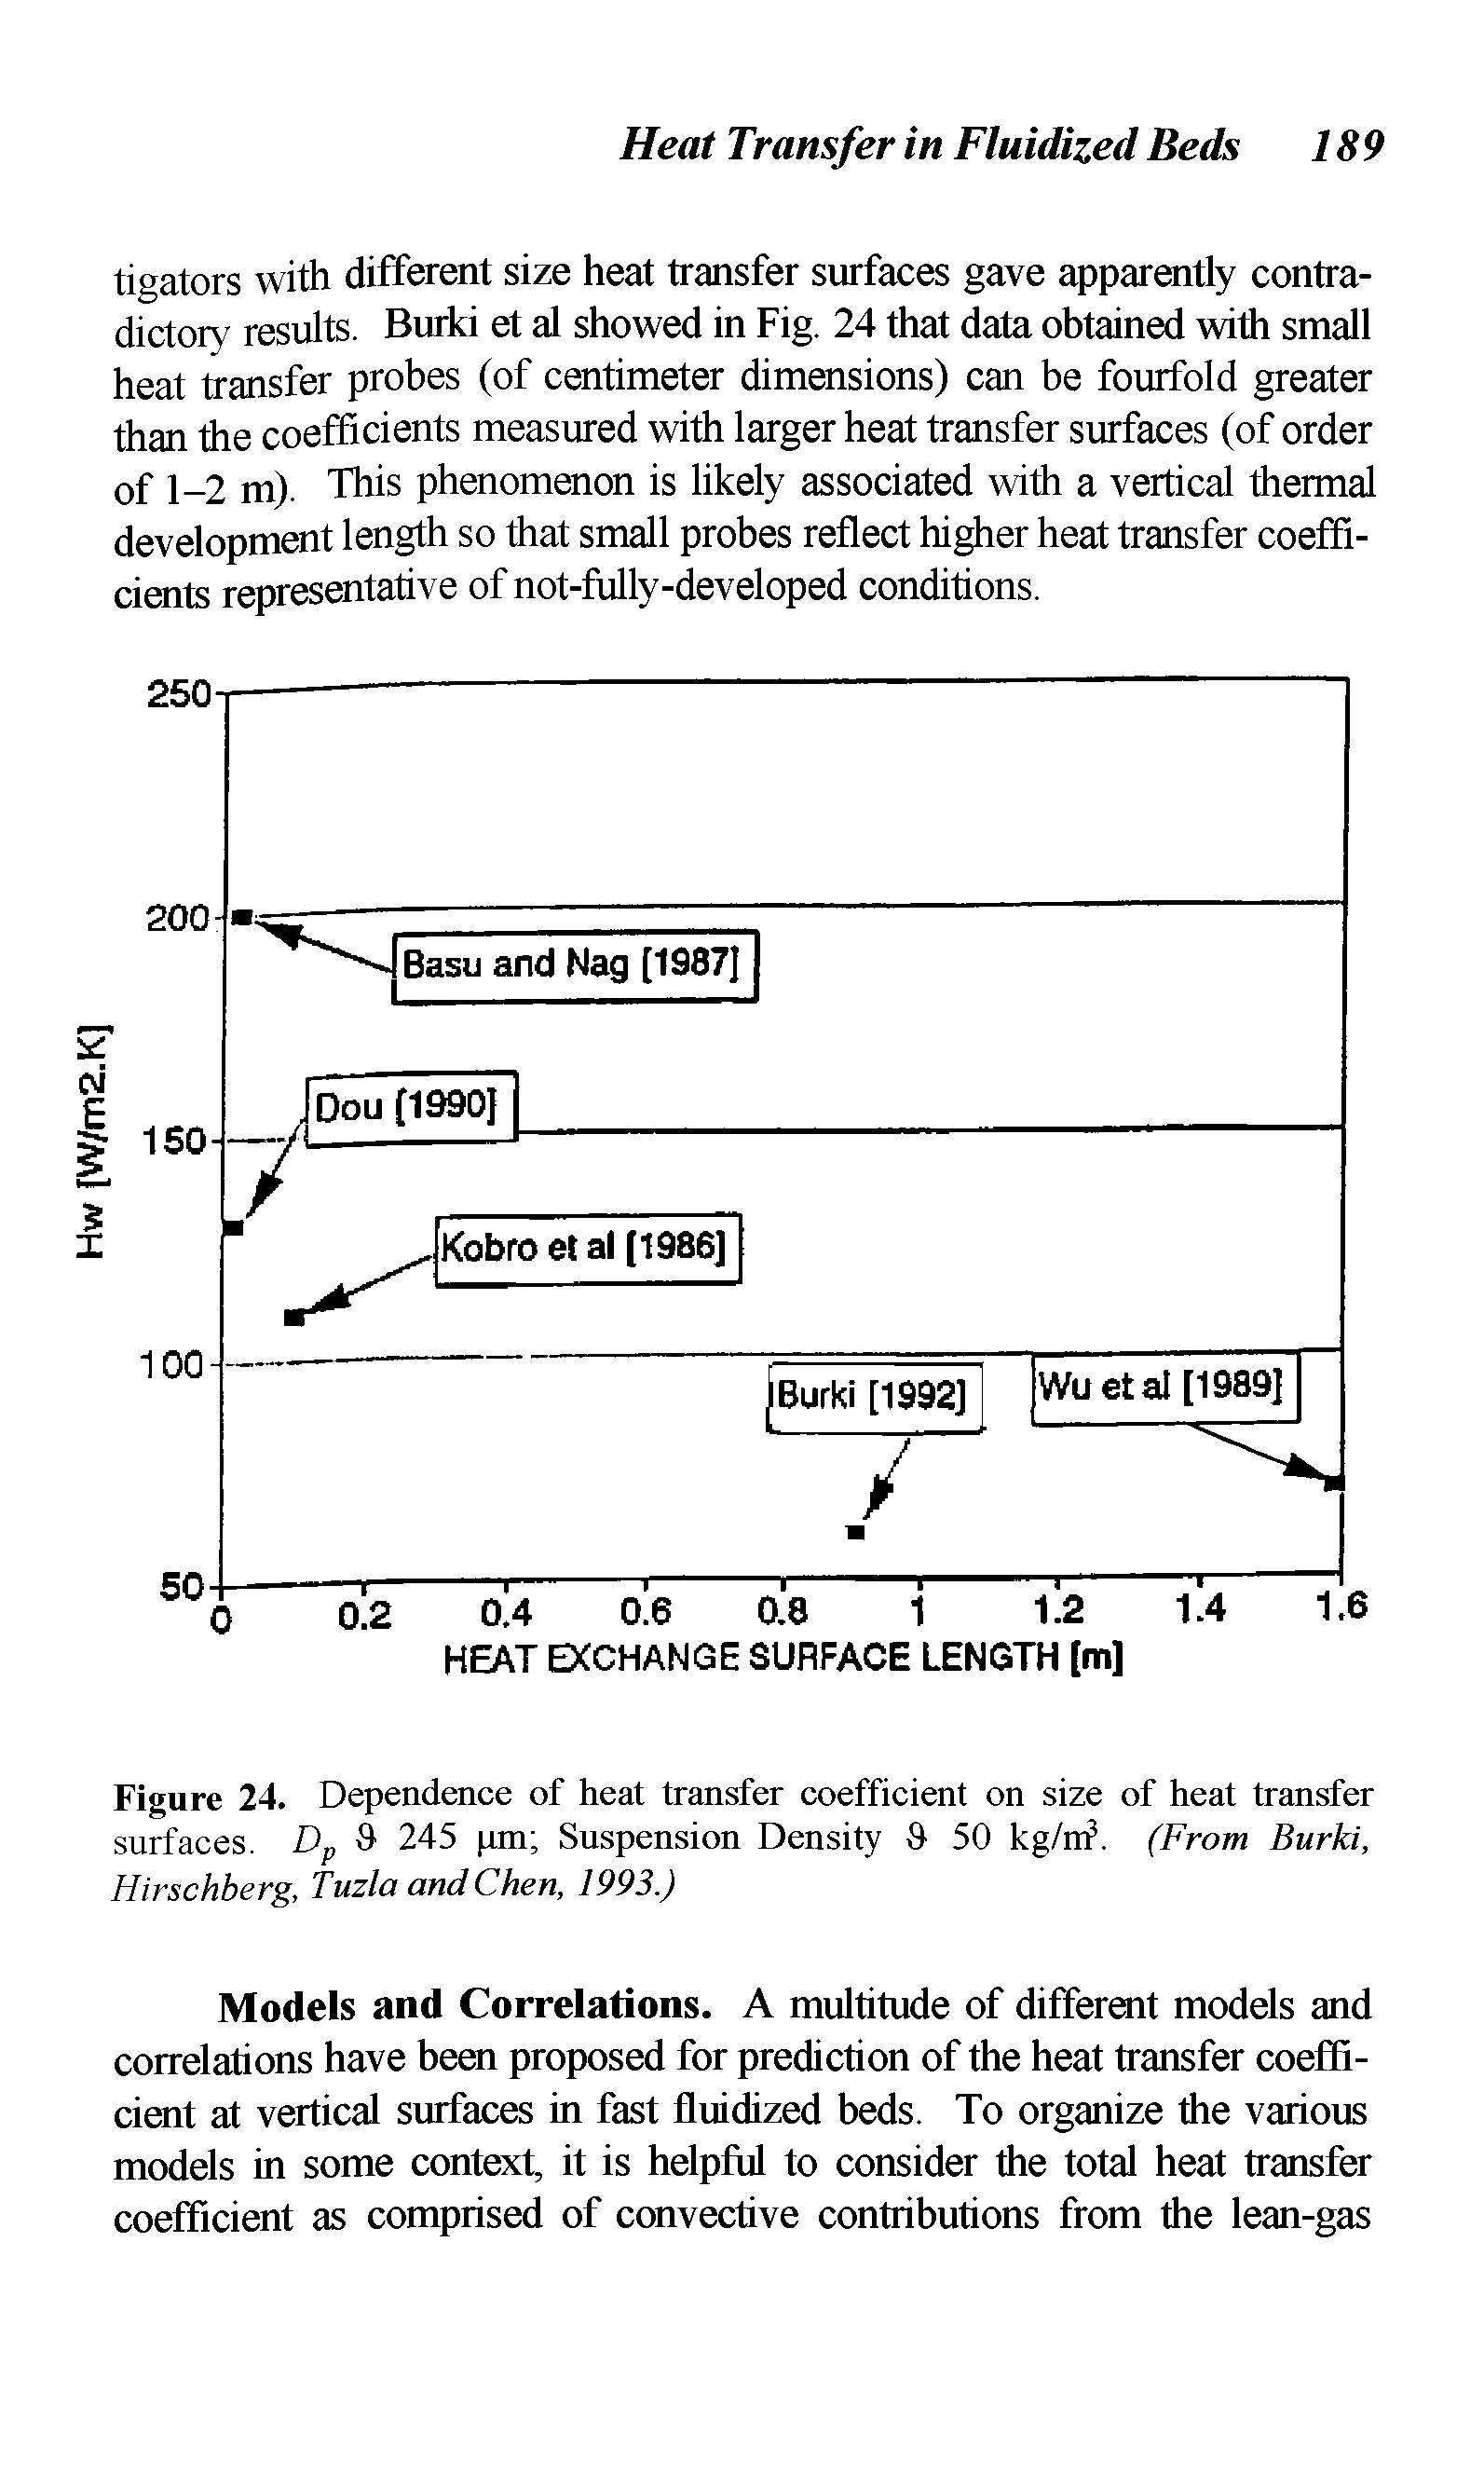 Figure 24. Dependence of heat transfer coefficient on size of heat transfer surfaces. Dp 9 245 pm Suspension Density 9 50 kg/irf. (From Burki, Hirschberg, Tuzla andChen, 1993.)...